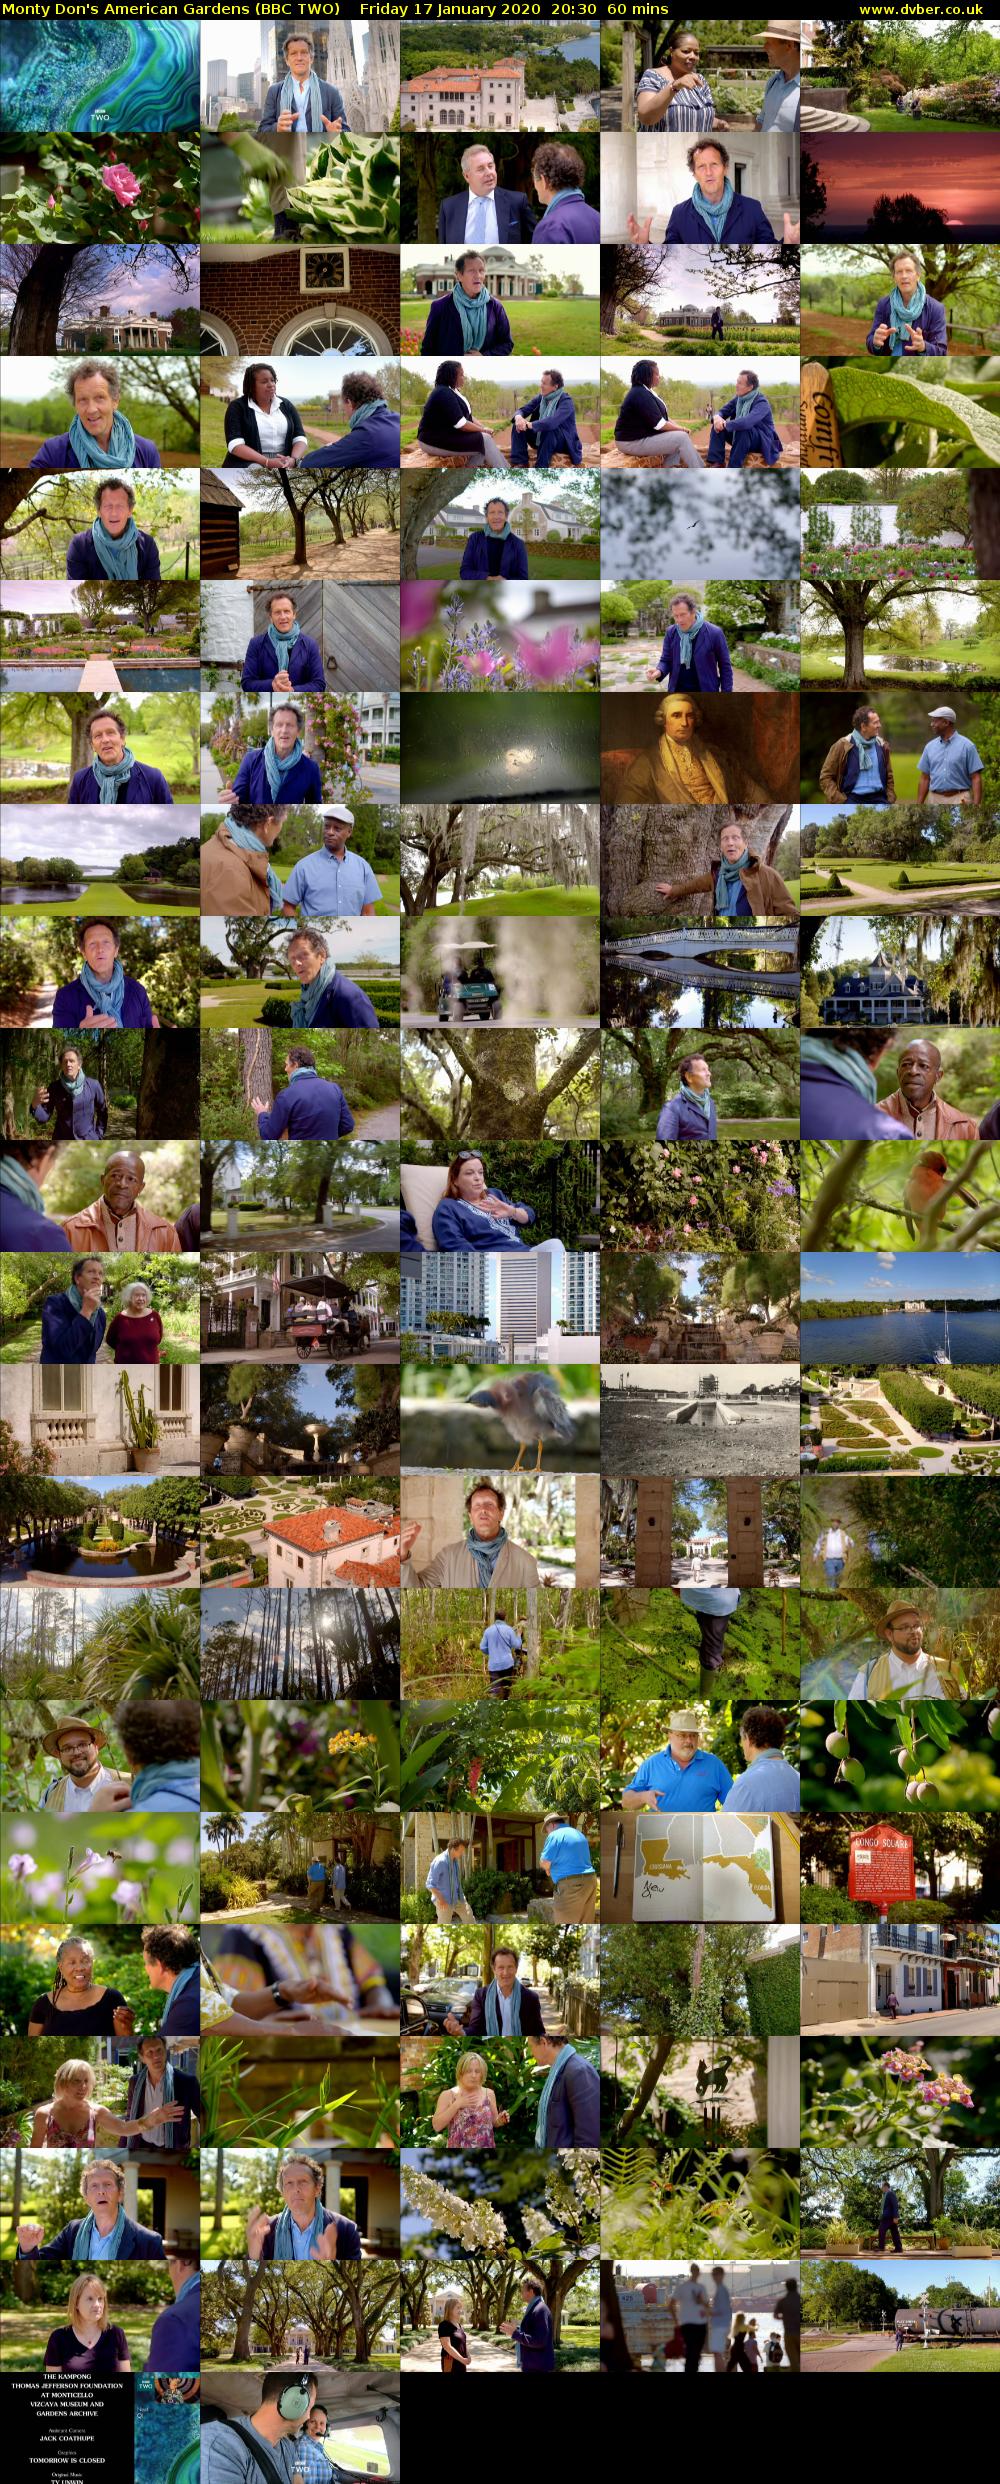 Monty Don's American Gardens (BBC TWO) Friday 17 January 2020 20:30 - 21:30